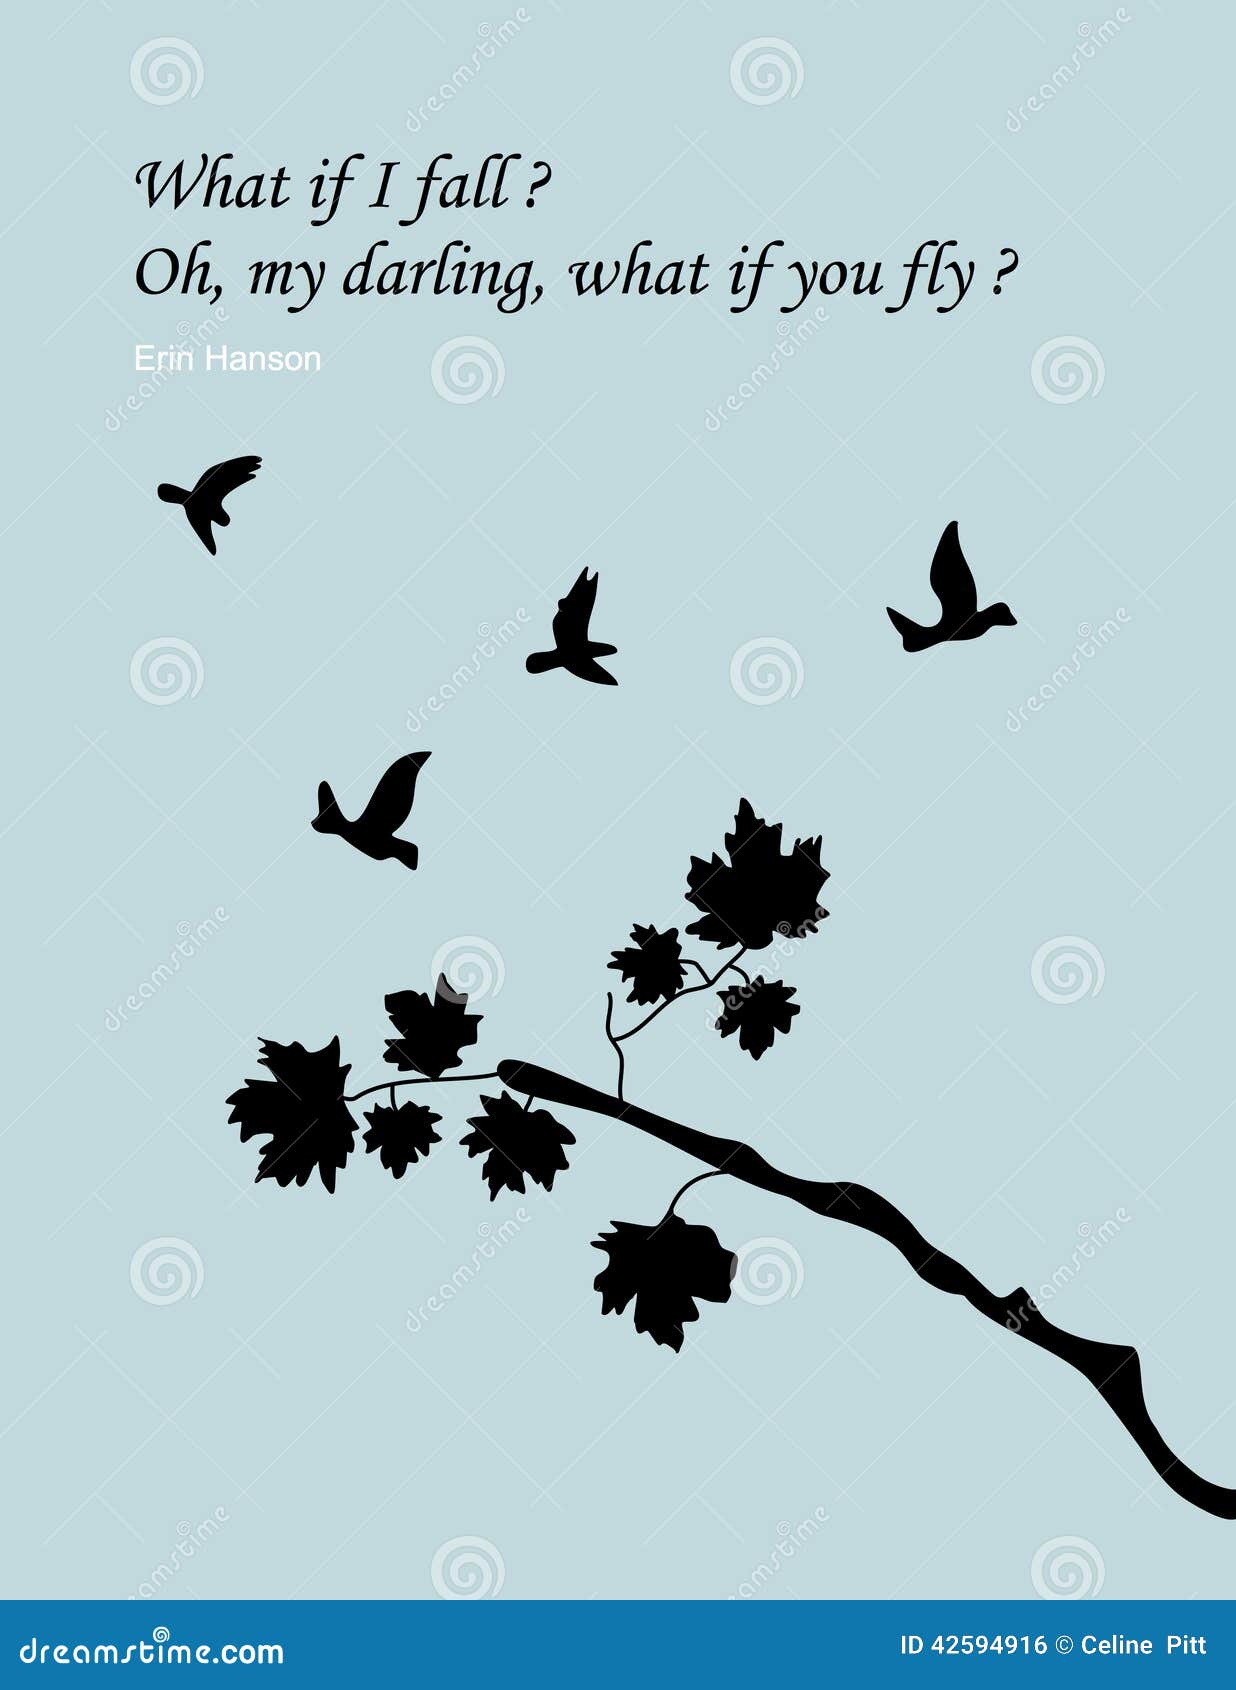 what if i fall? oh, my darling, what if you fly?